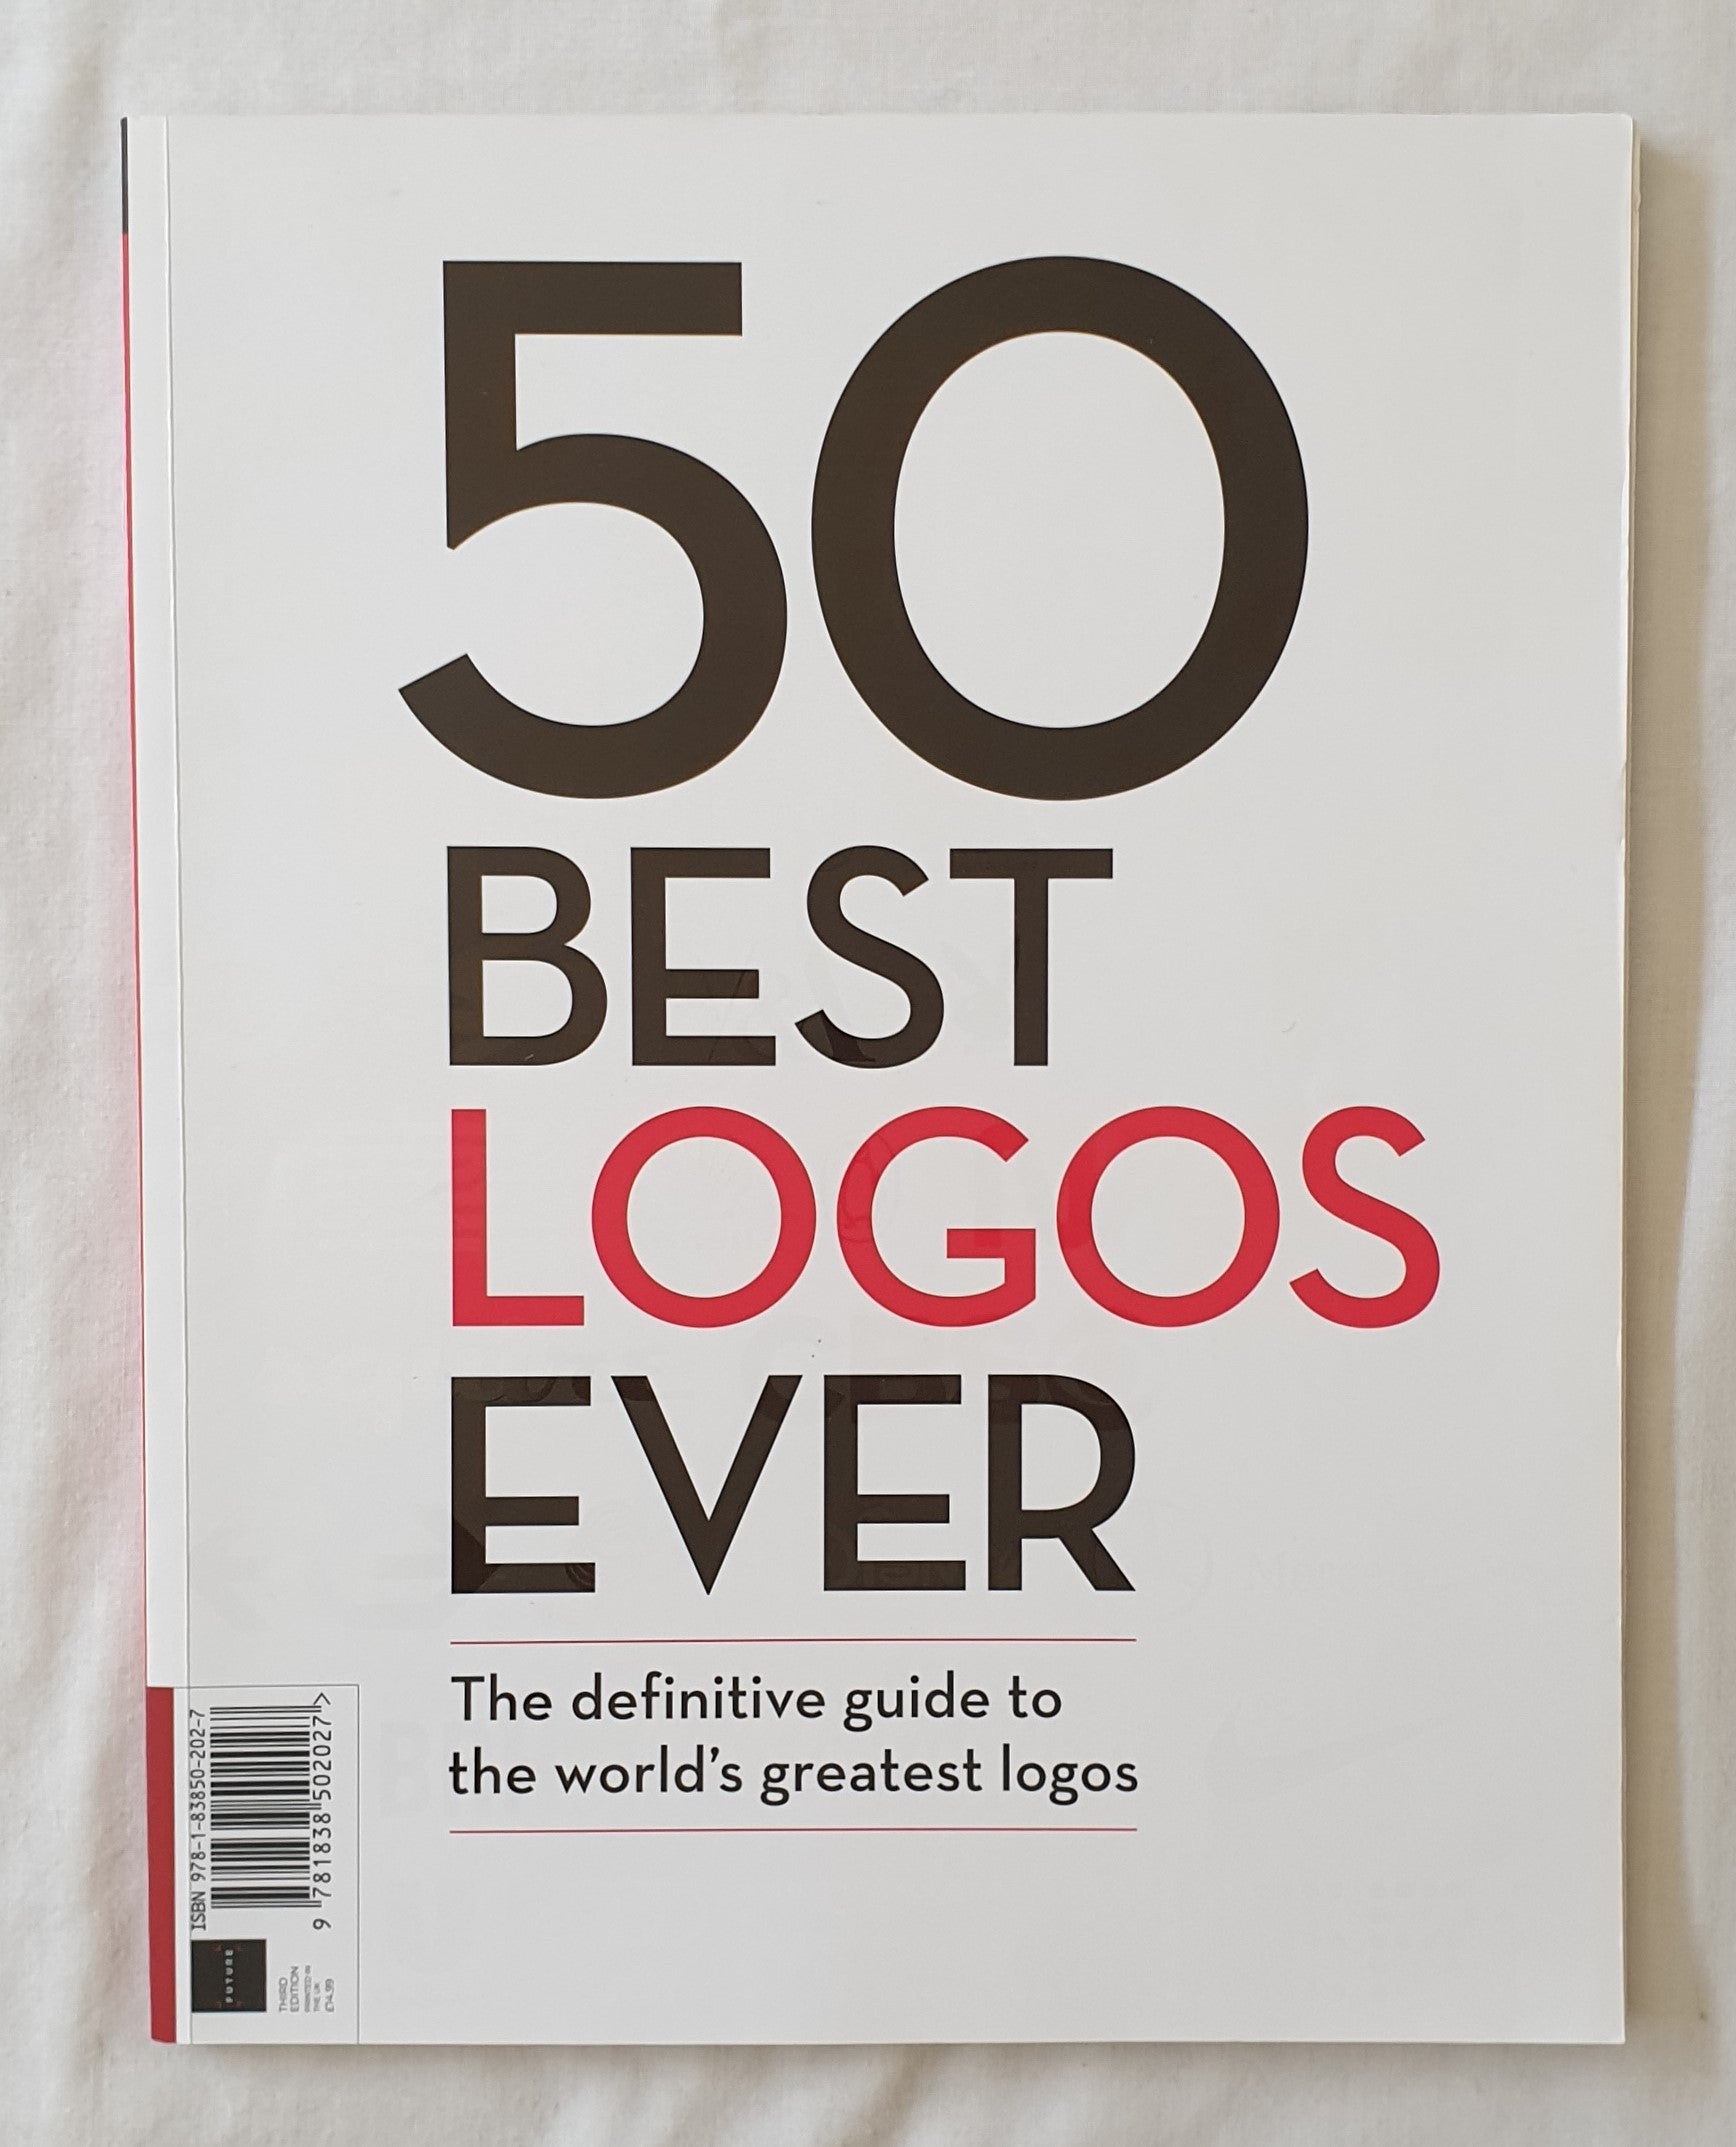 50 Best Logos Ever by Future PLC